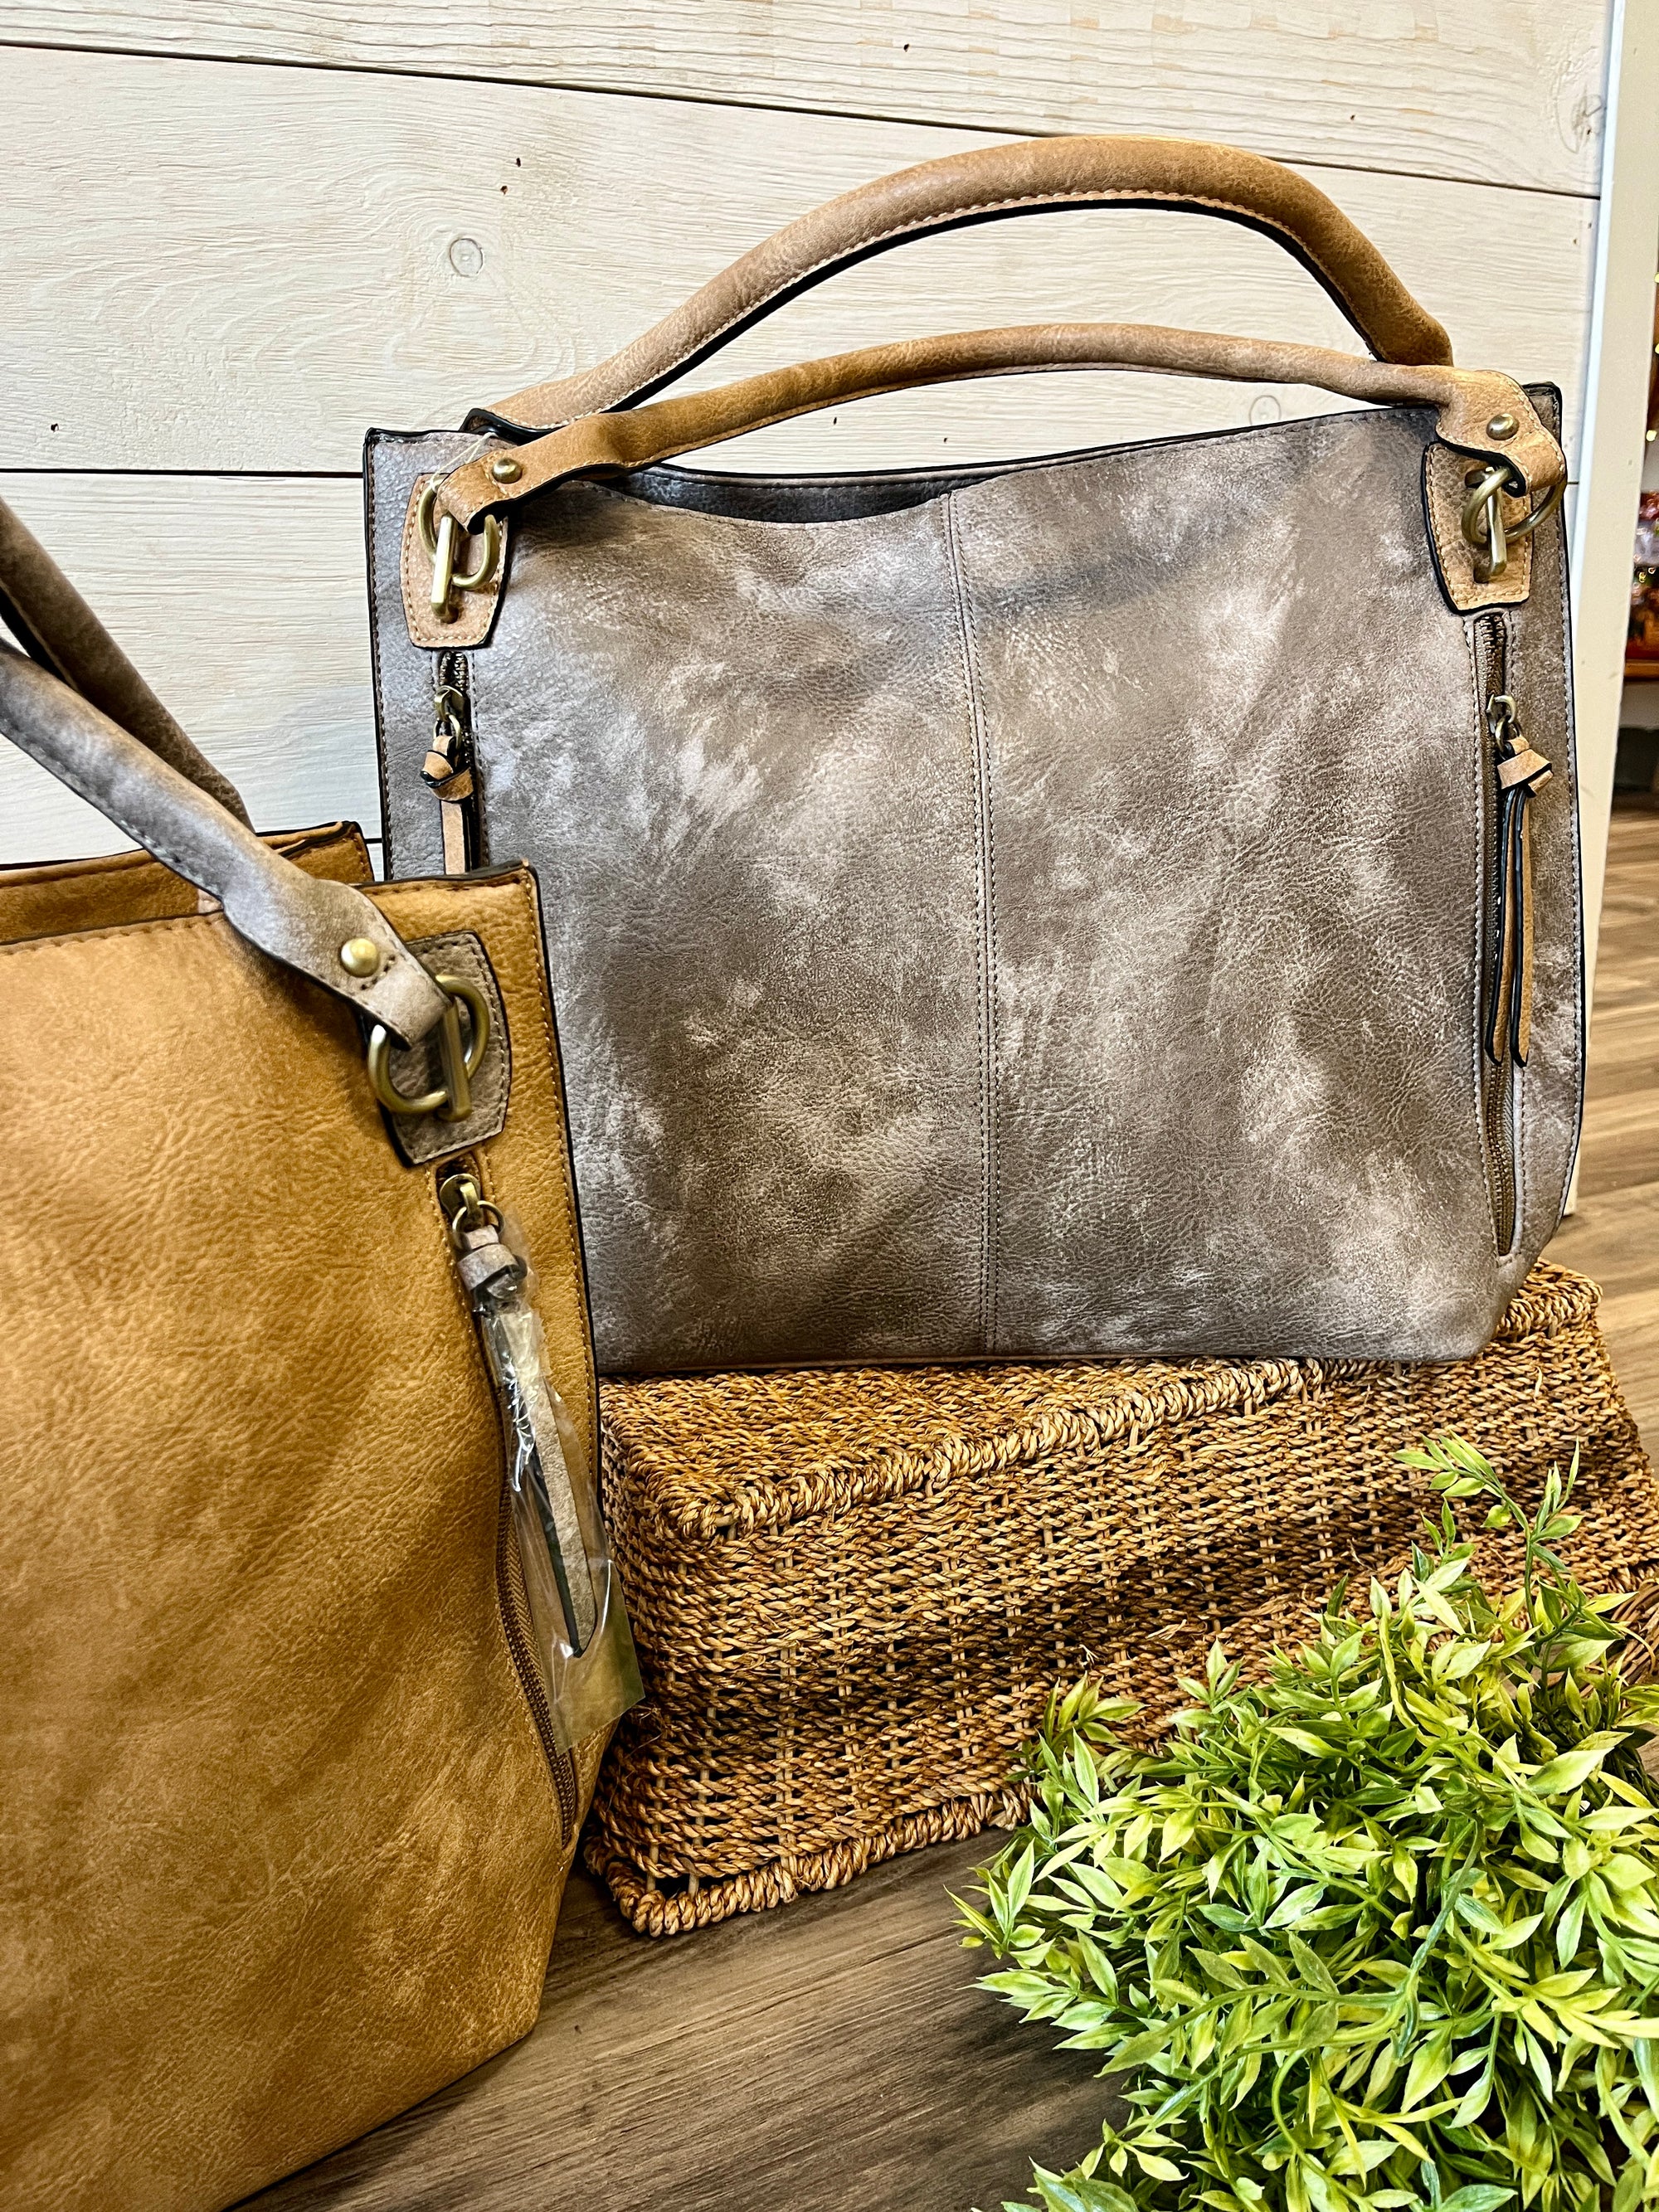 Connar Distressed Tote